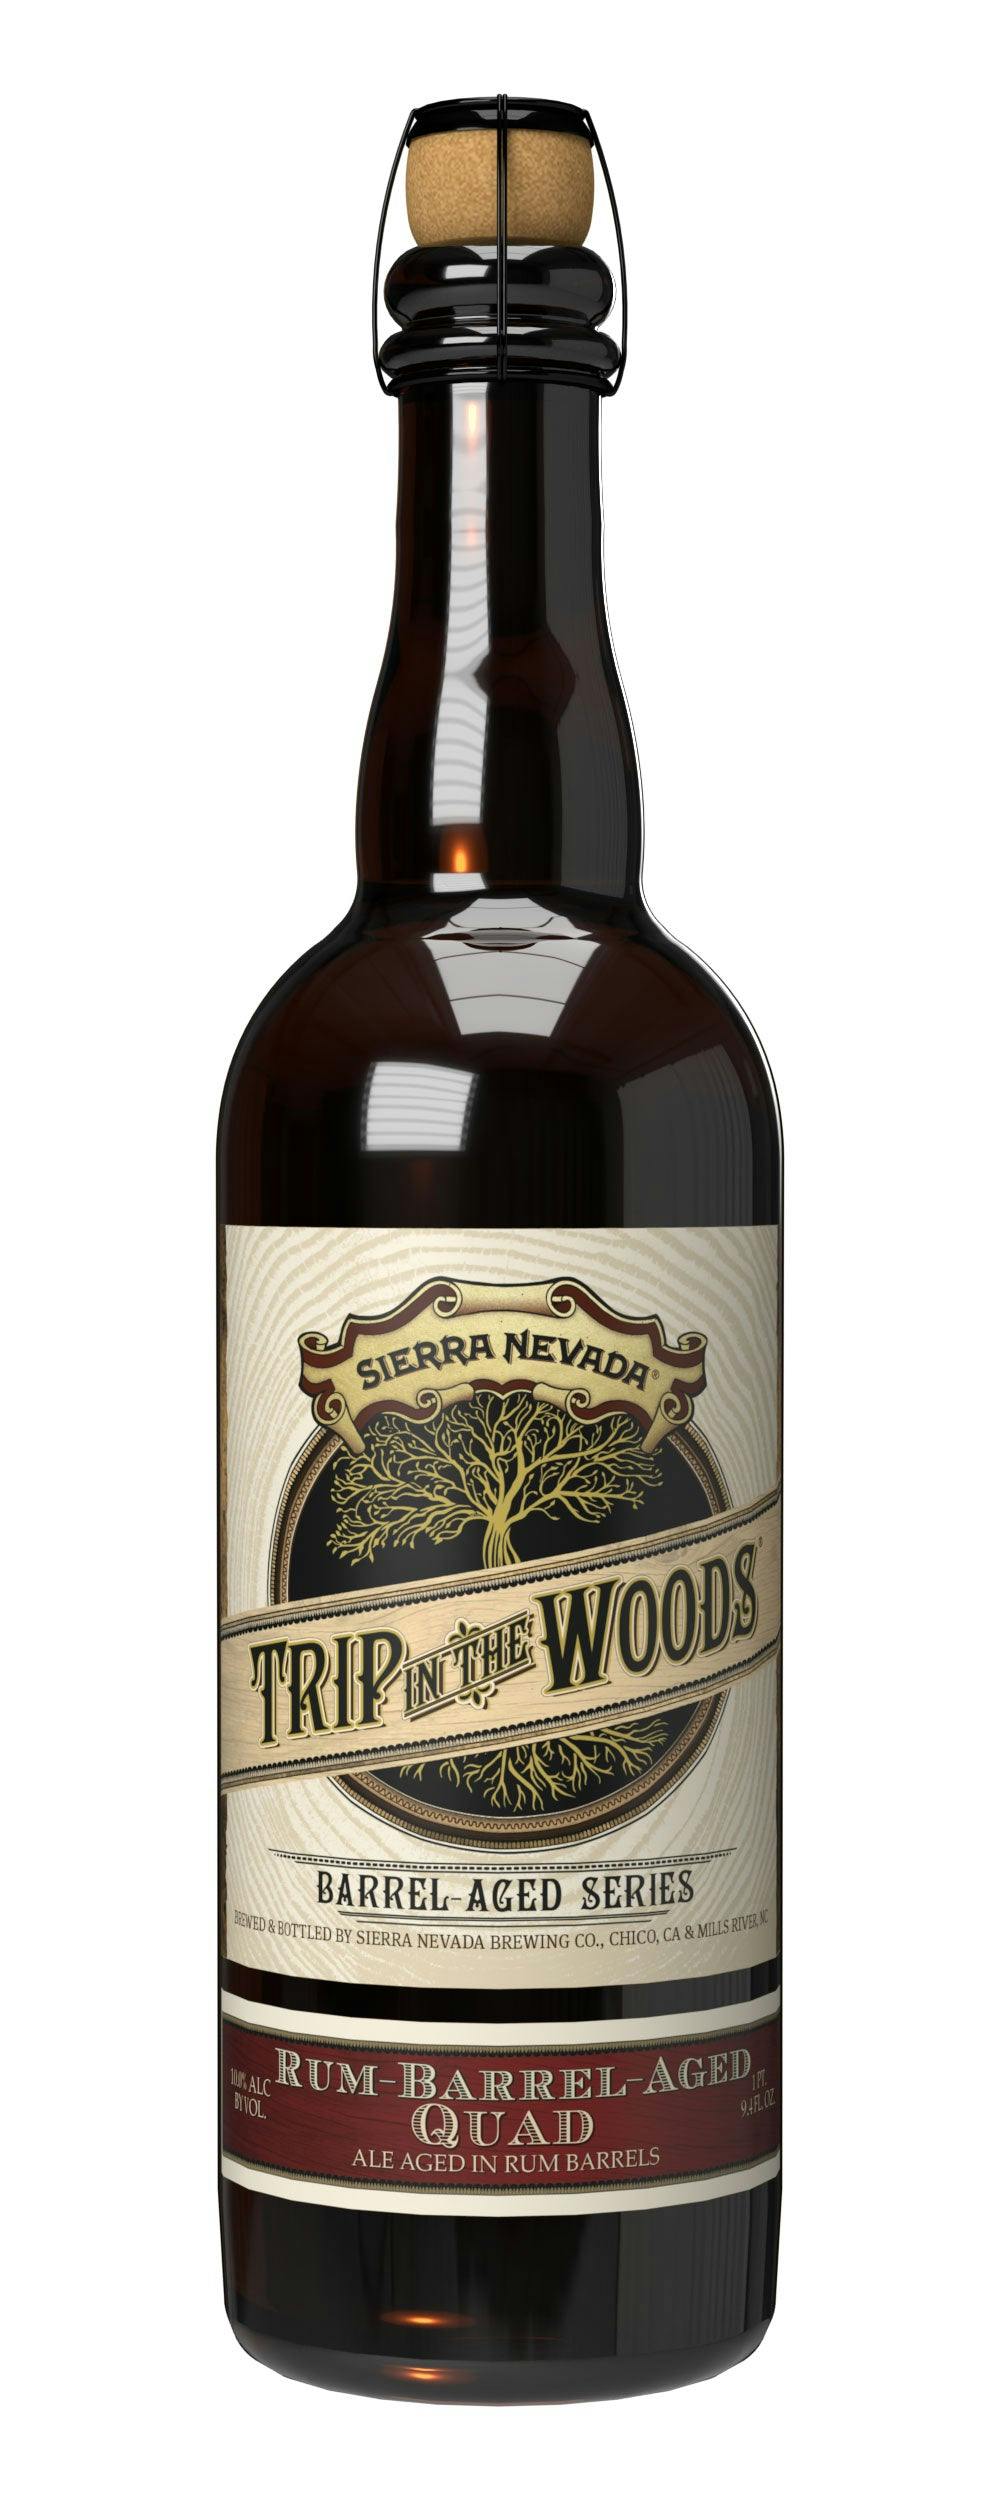 Trip in the Woods Rum Barrel Aged Quad 750 mL bottle